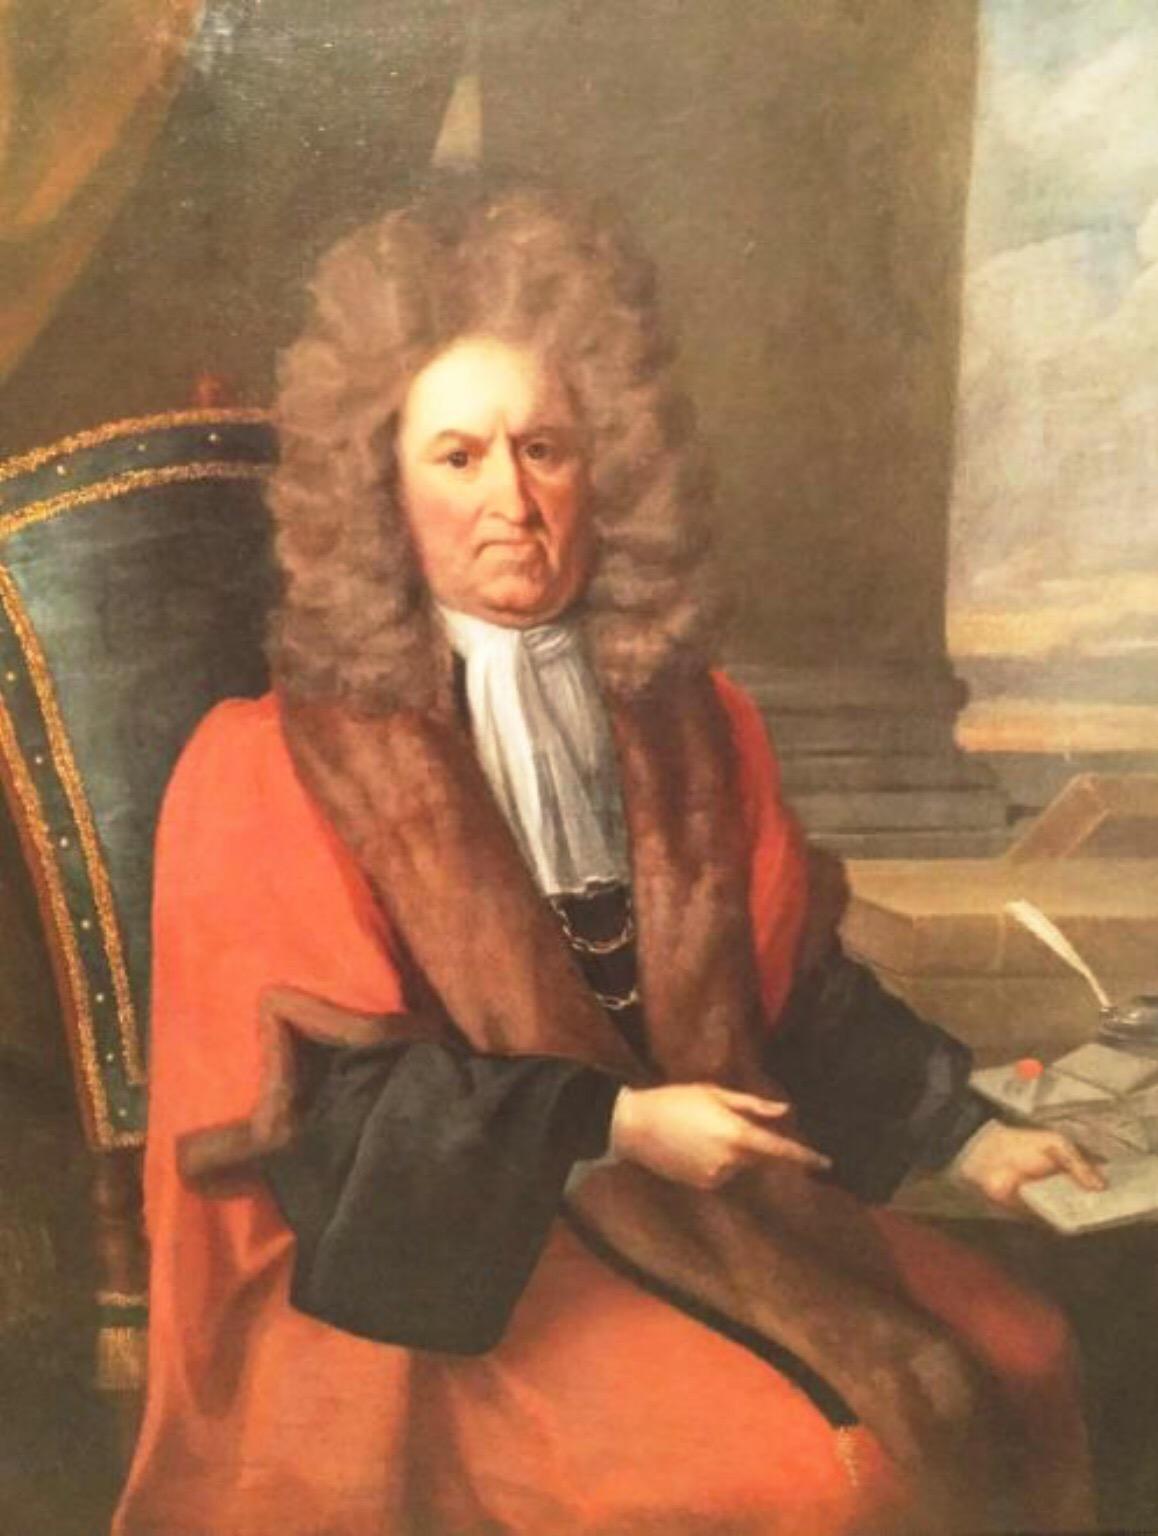 Judge Robert Dormer MP By Thomas Hill English School

A fine oil on canvas portrait of Sir Robert Dormer MP,born 1650 - died 1726

Attributed to Thomas Hill 1661 - 1734.
Initialed on the letter on the table T.H.

HISTORY
Robert Dormer was the second